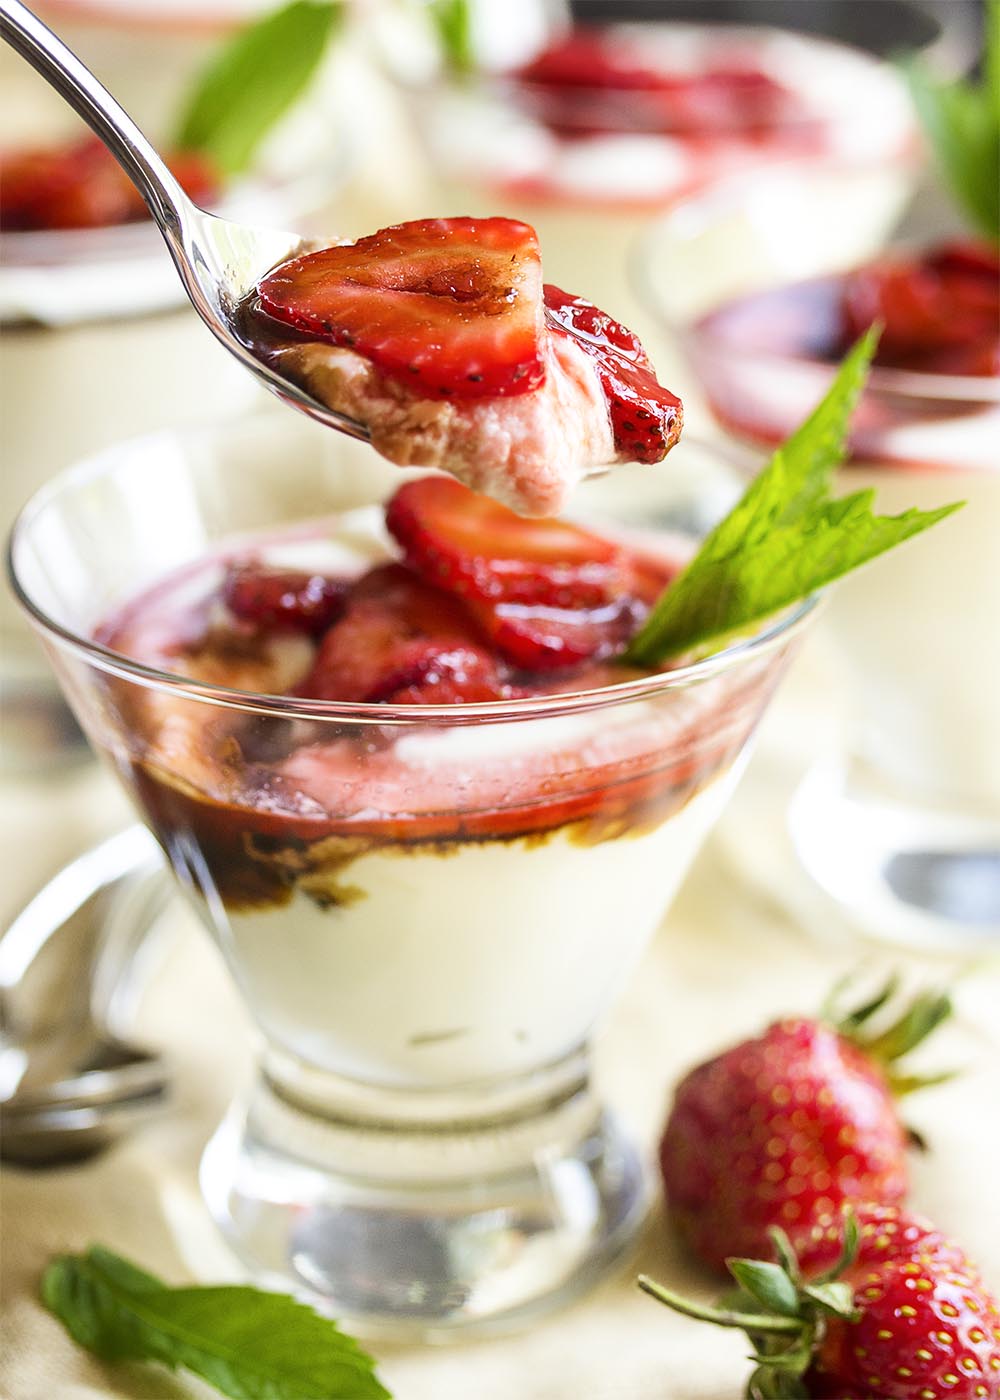 Balsamic Strawberry Mascarpone Mousse - Ricotta and mascarpone are whipped together in a light and flavorful mousse which is topped by balsamic strawberries in this yummy Italian style no bake dessert. | justalittlebitofbacon.com